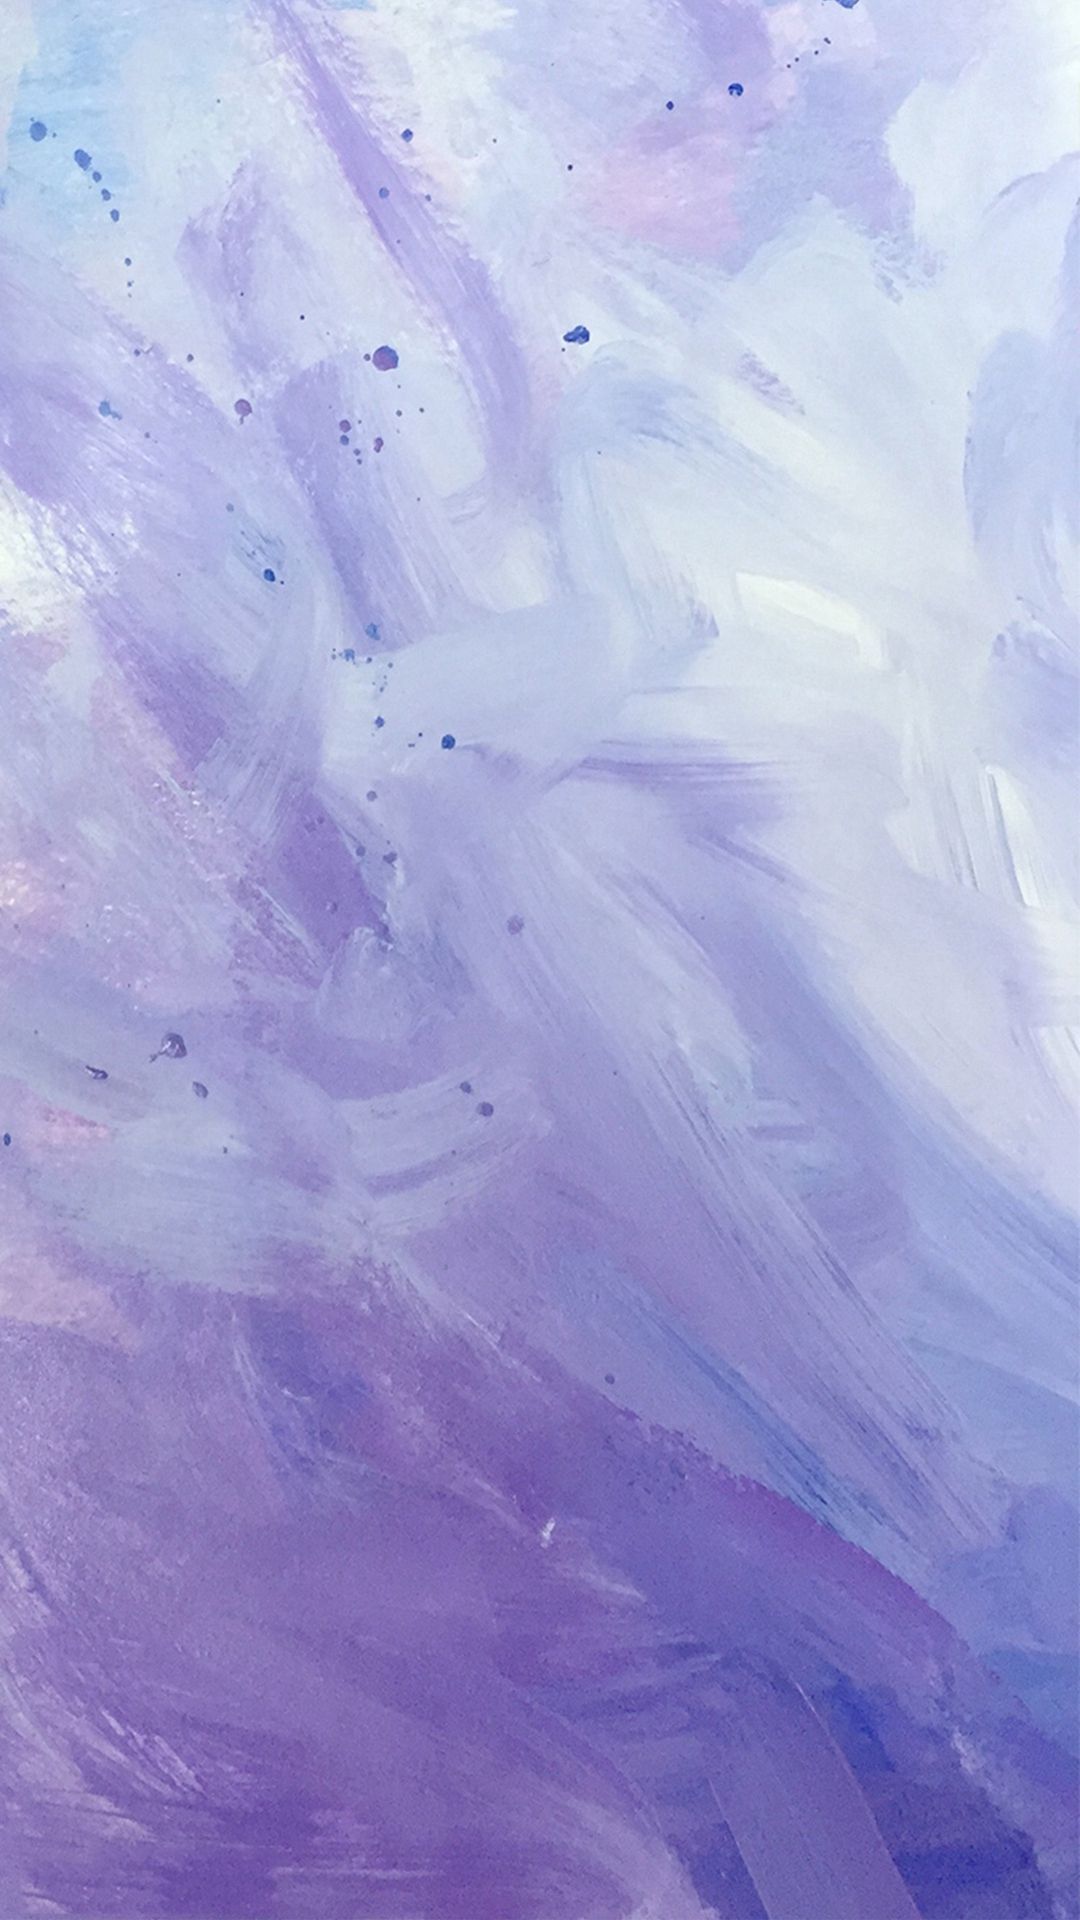 Watercolor phone background